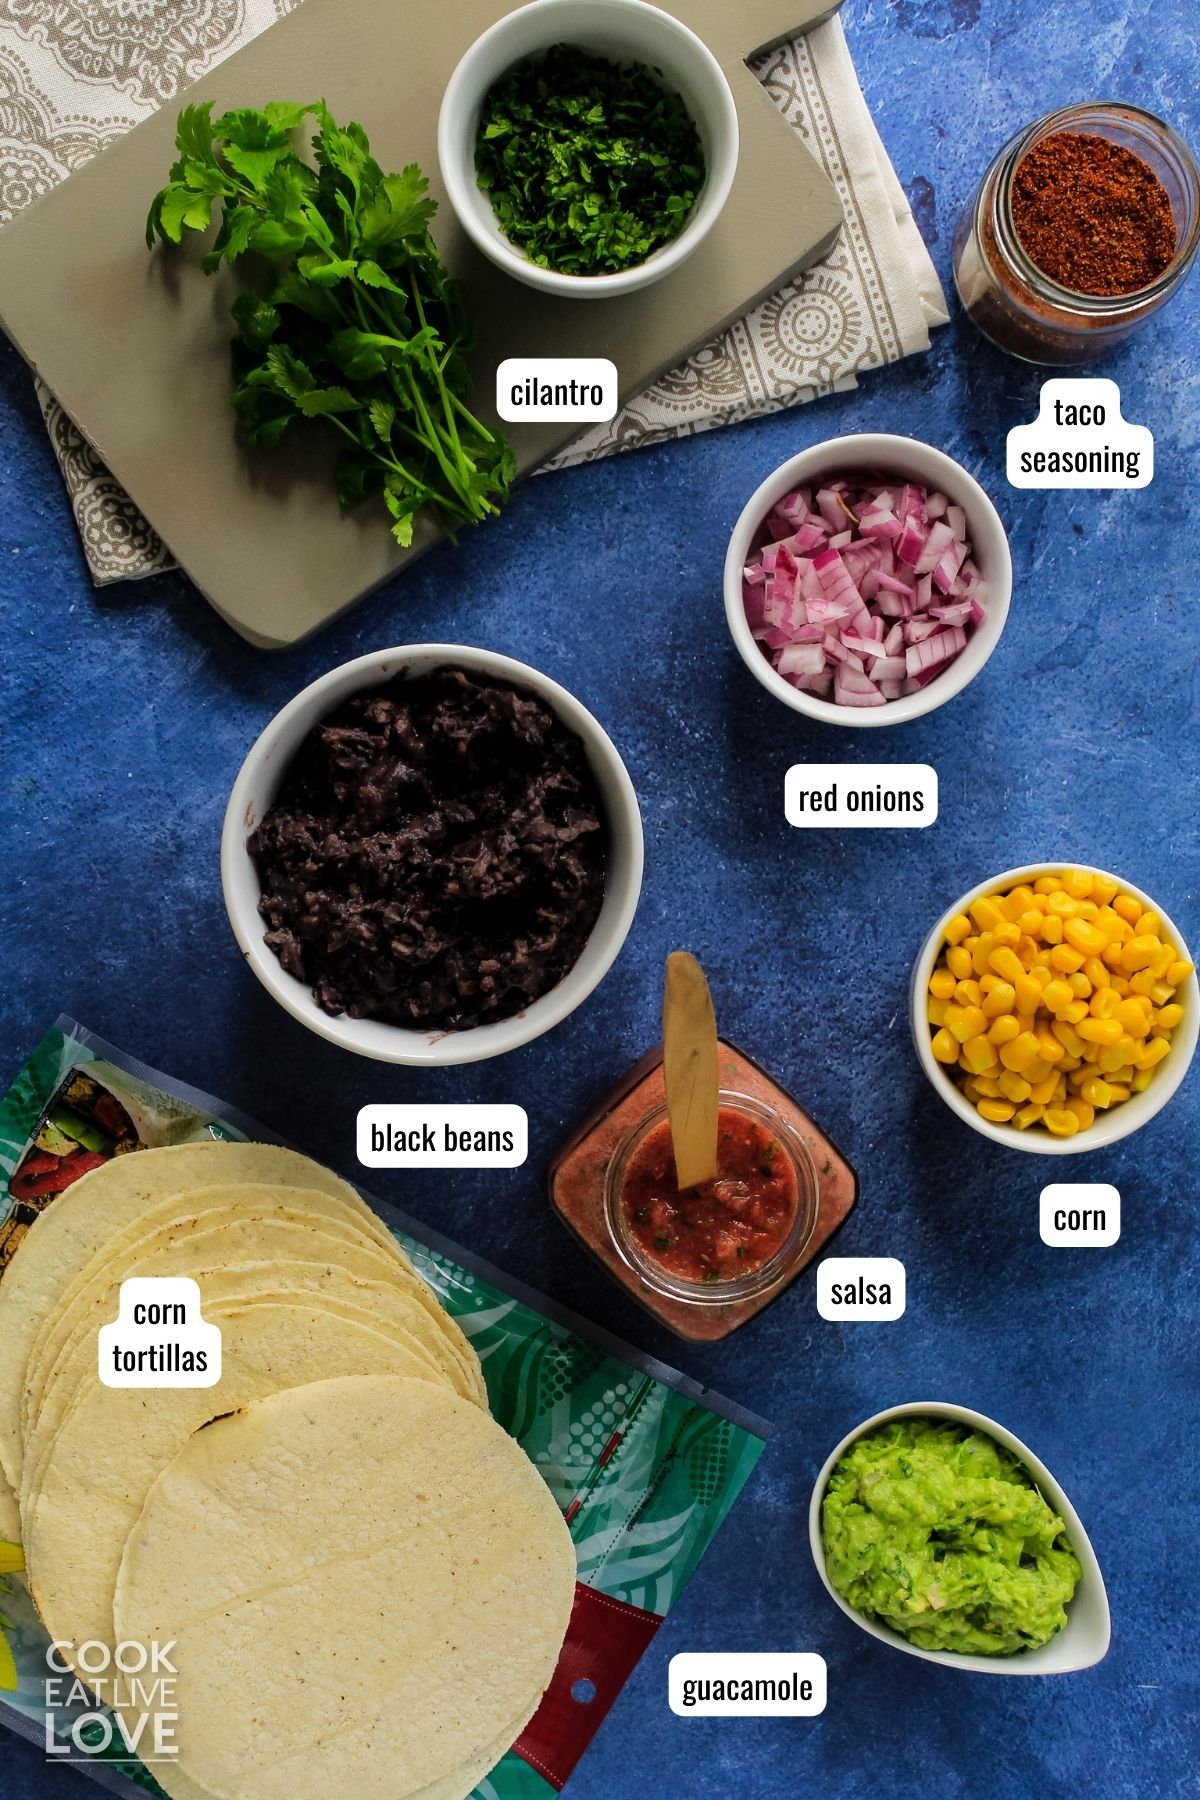 Ingredients to make taquitos on a table with text labels.